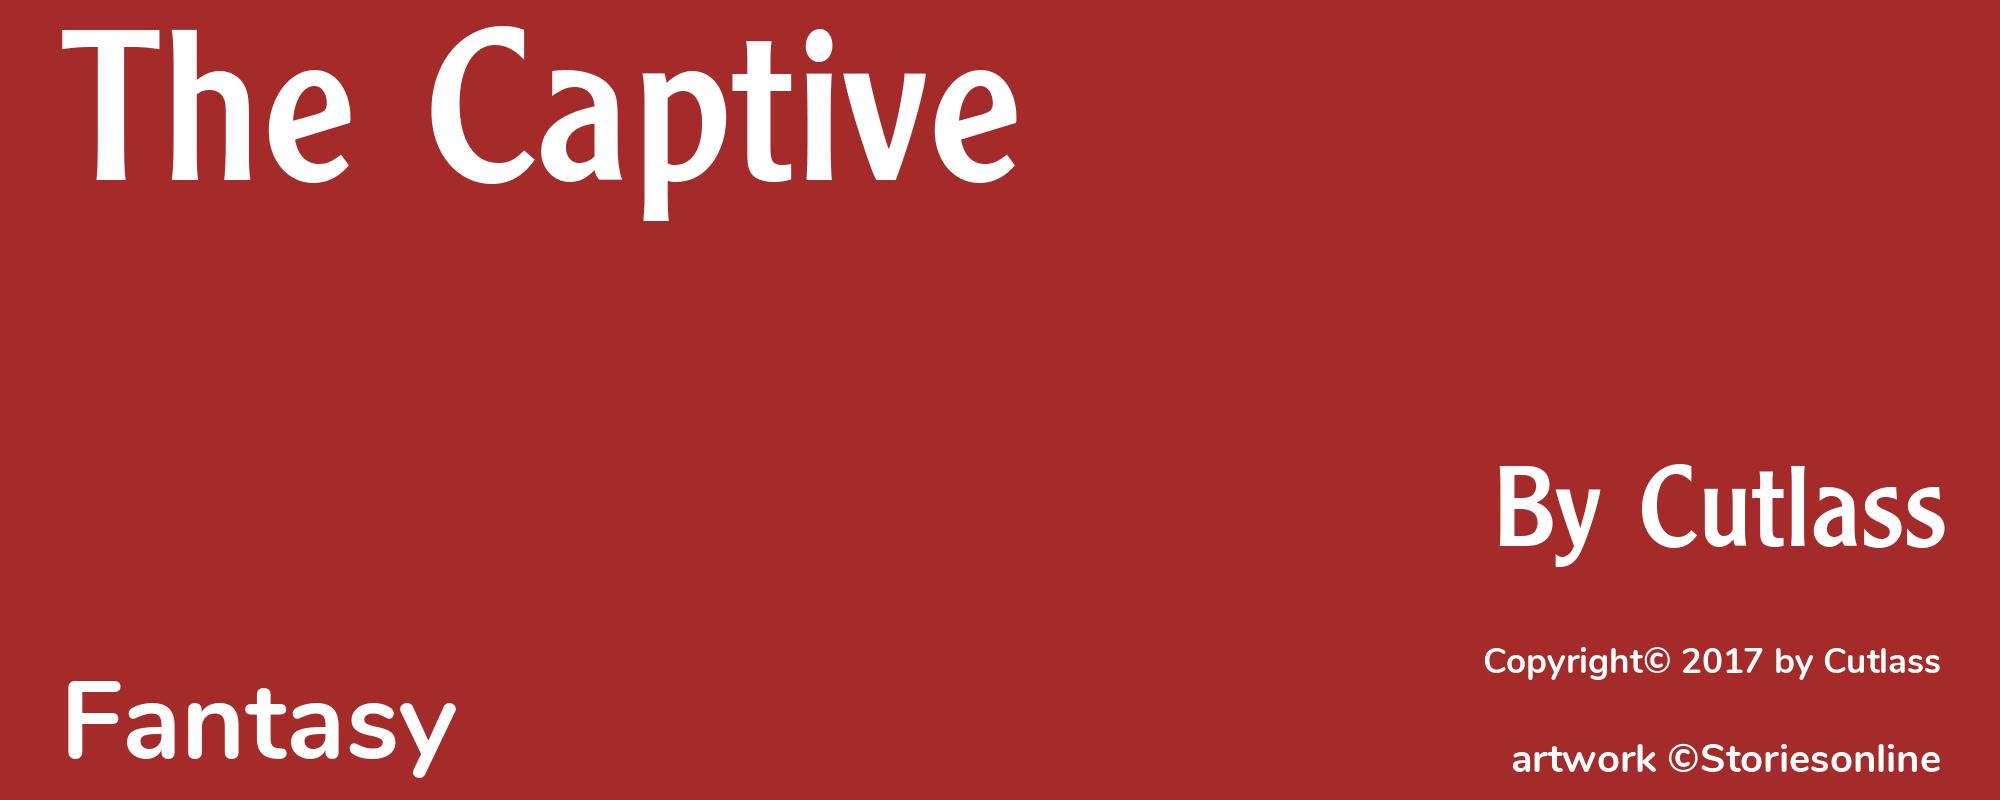 The Captive - Cover